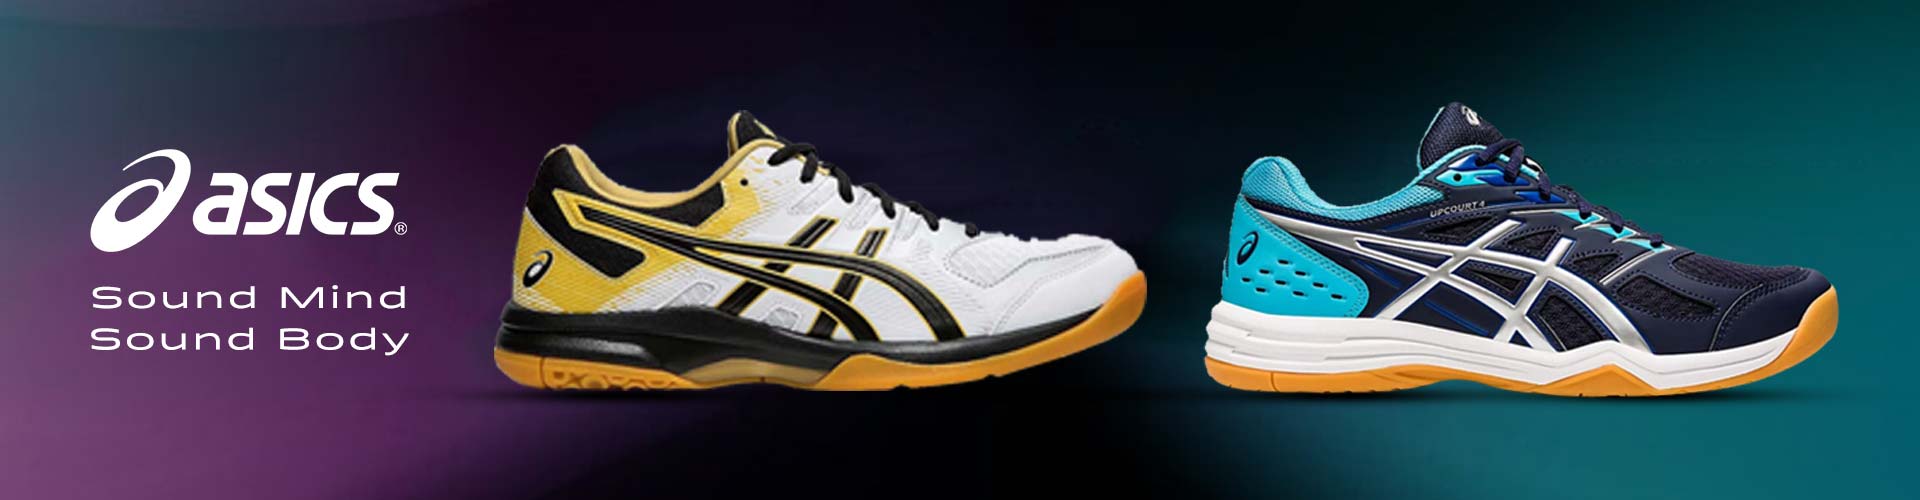 Buy Asics Squash Shoes Online in India at Best Price 